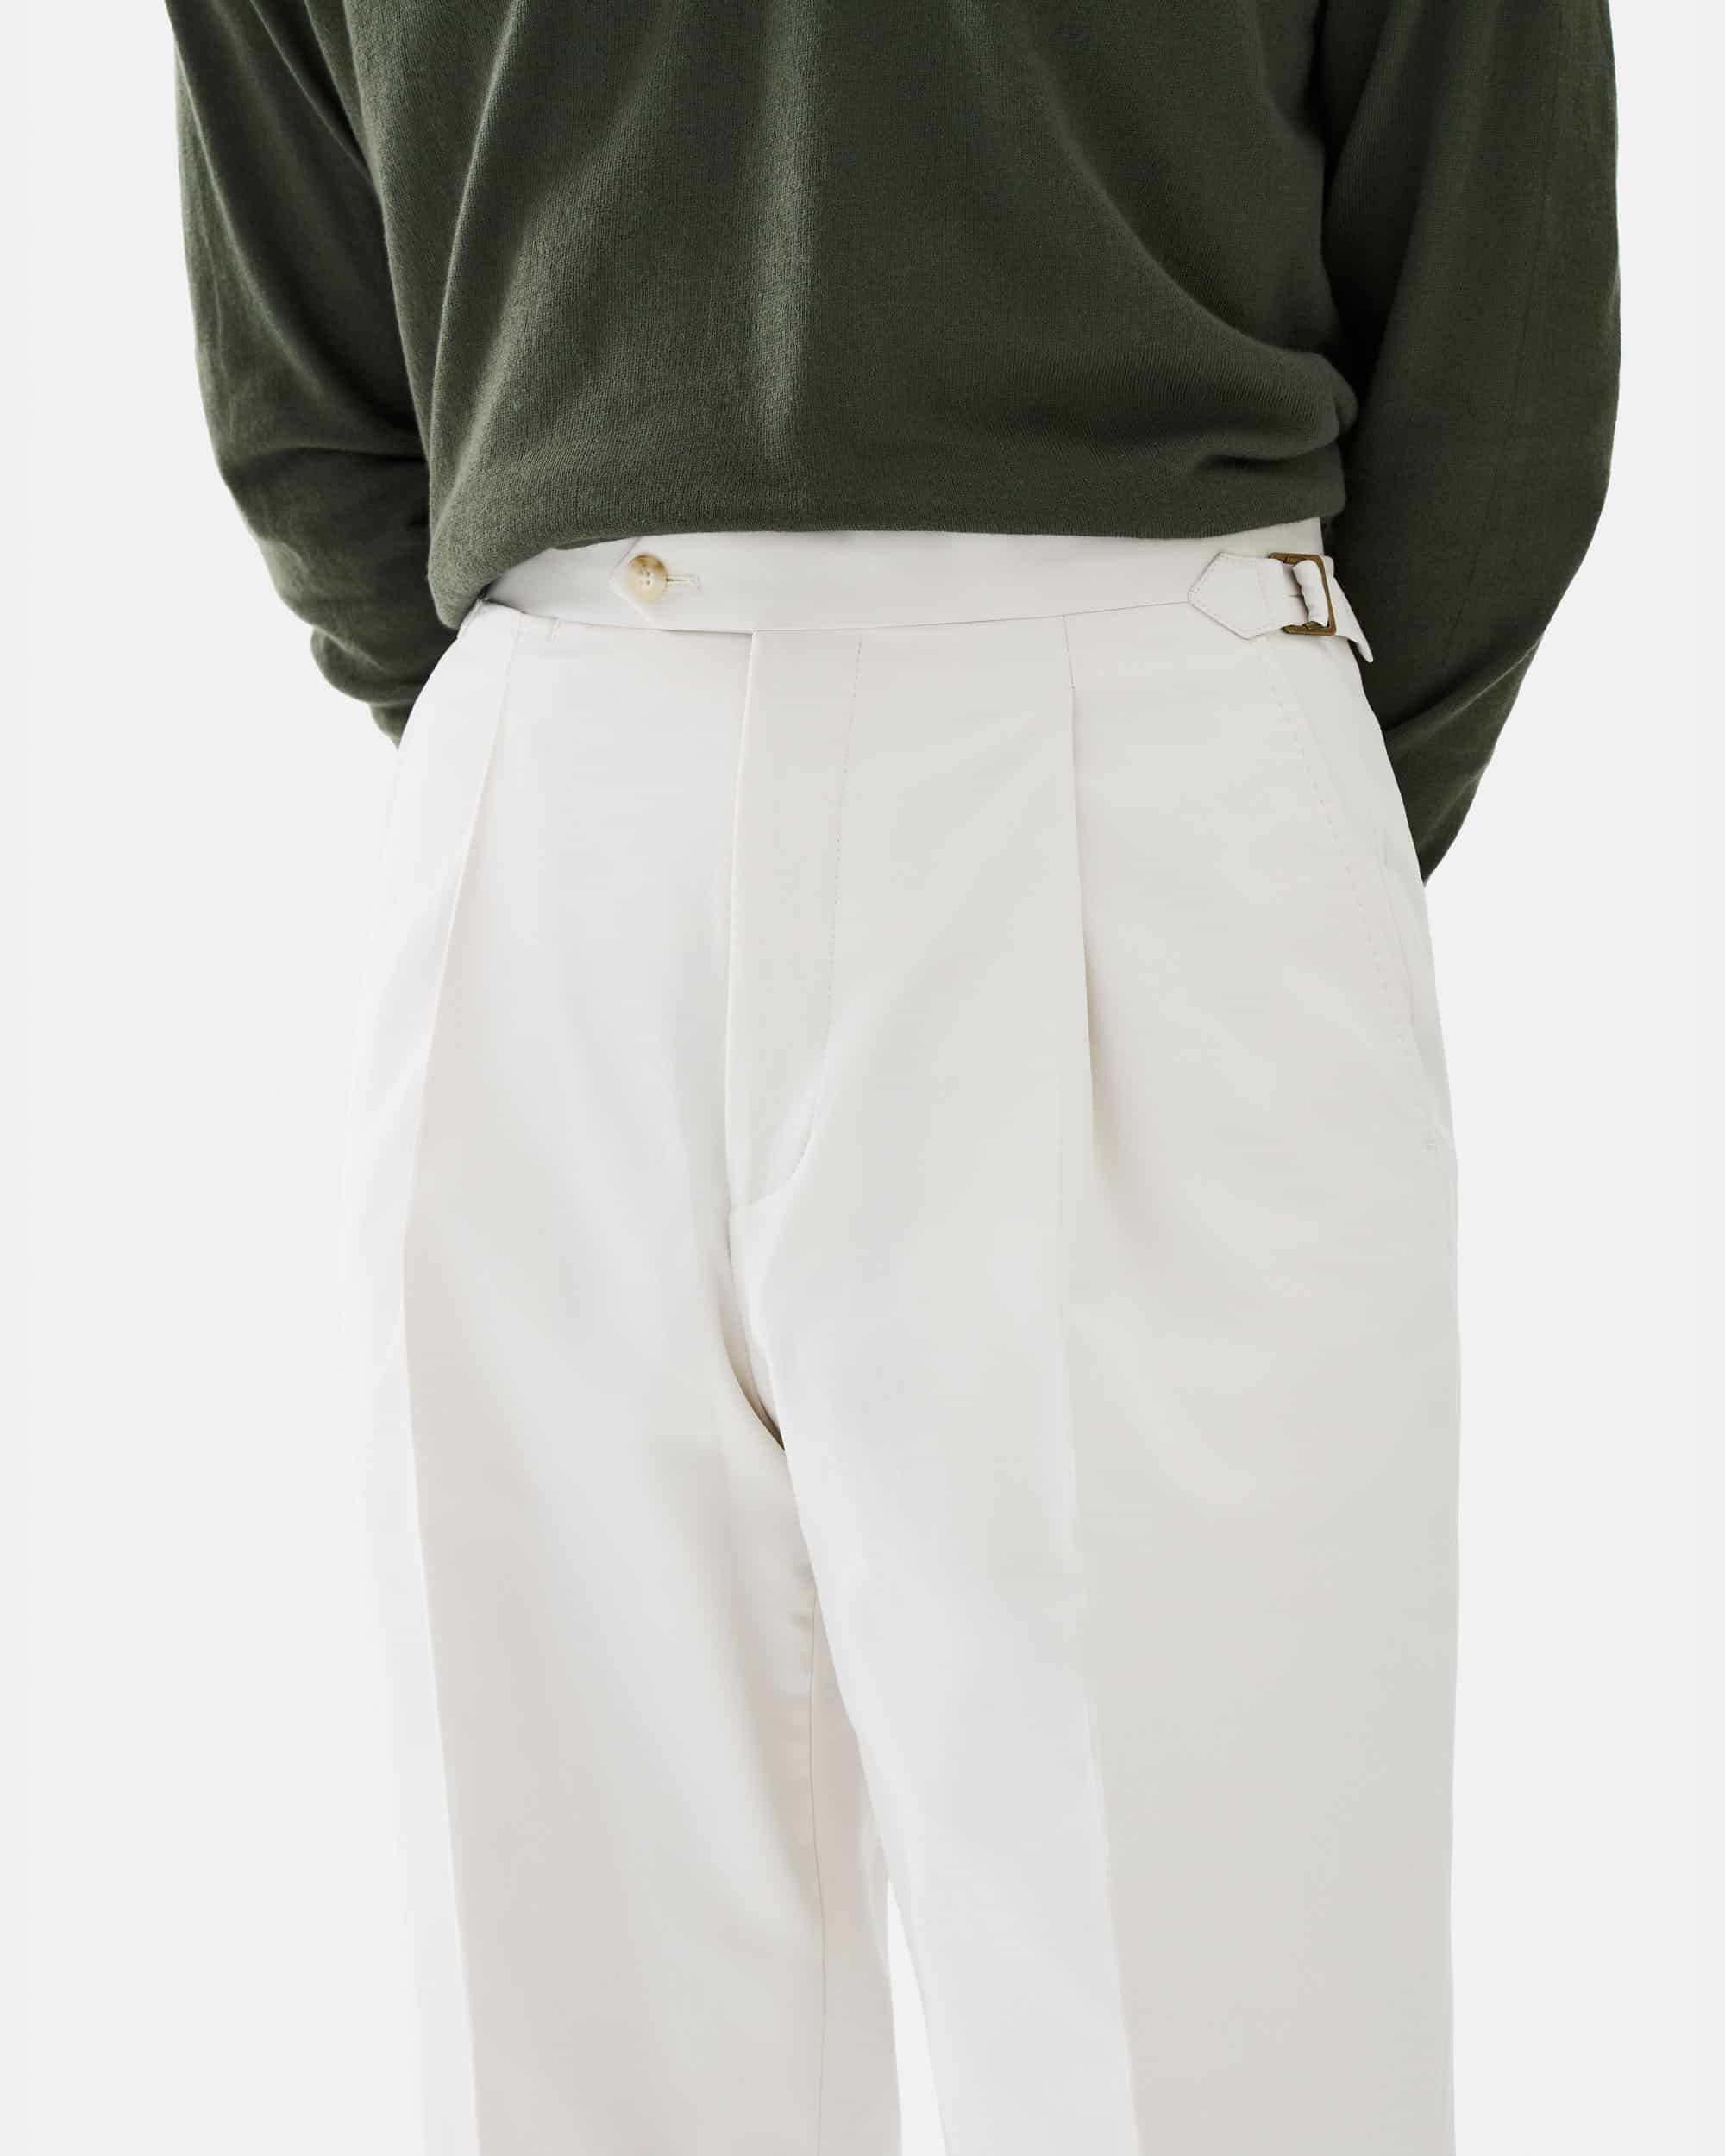 Trouser 'mare' iced cotton twill off white image 4